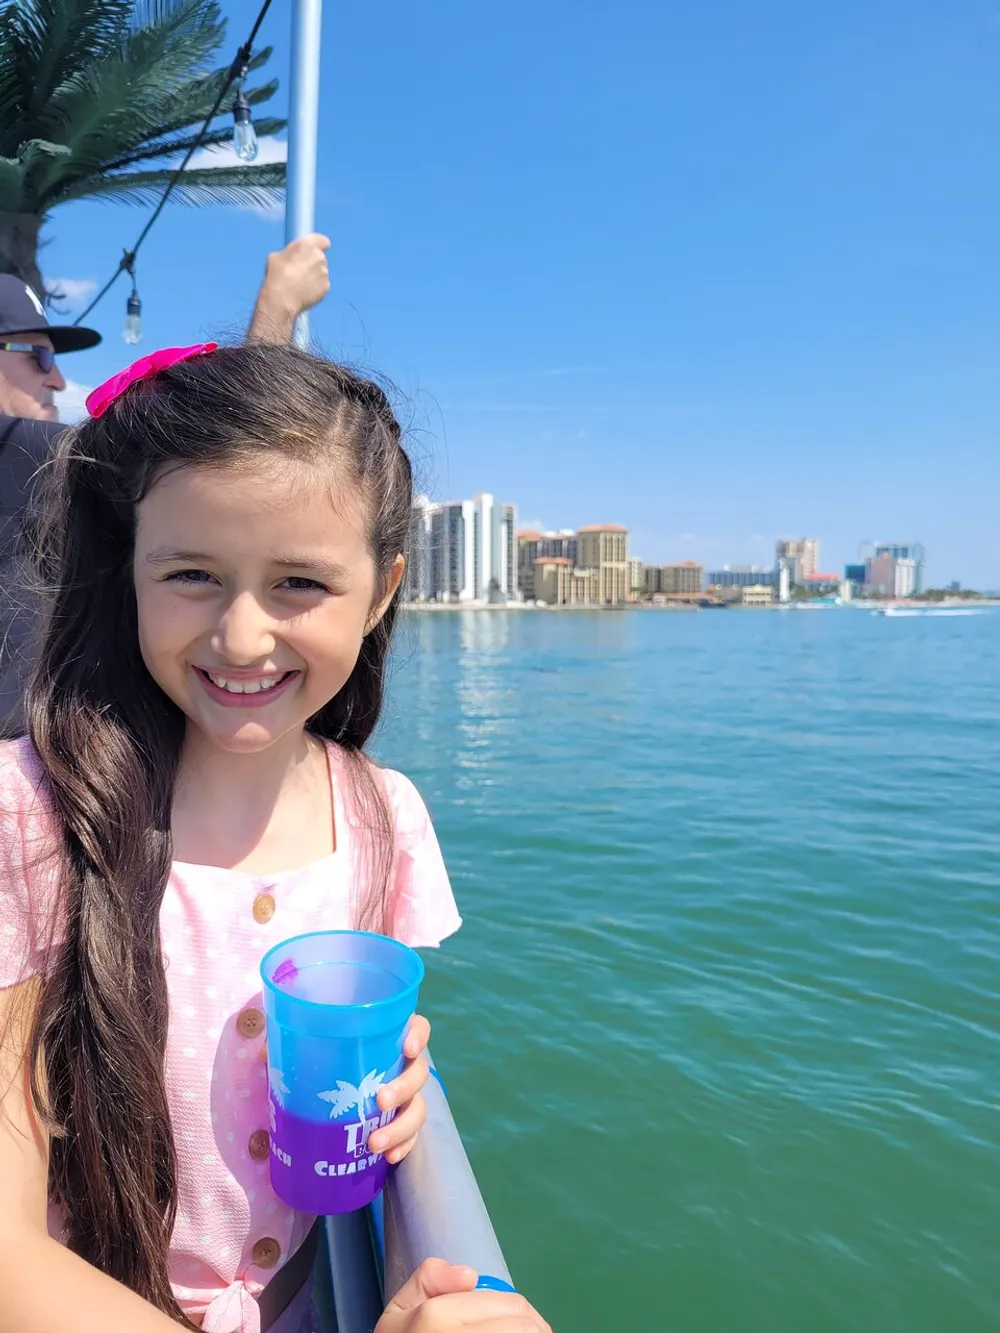 A smiling young girl is holding a blue cup and standing by the railing of a boat with a city skyline in the background